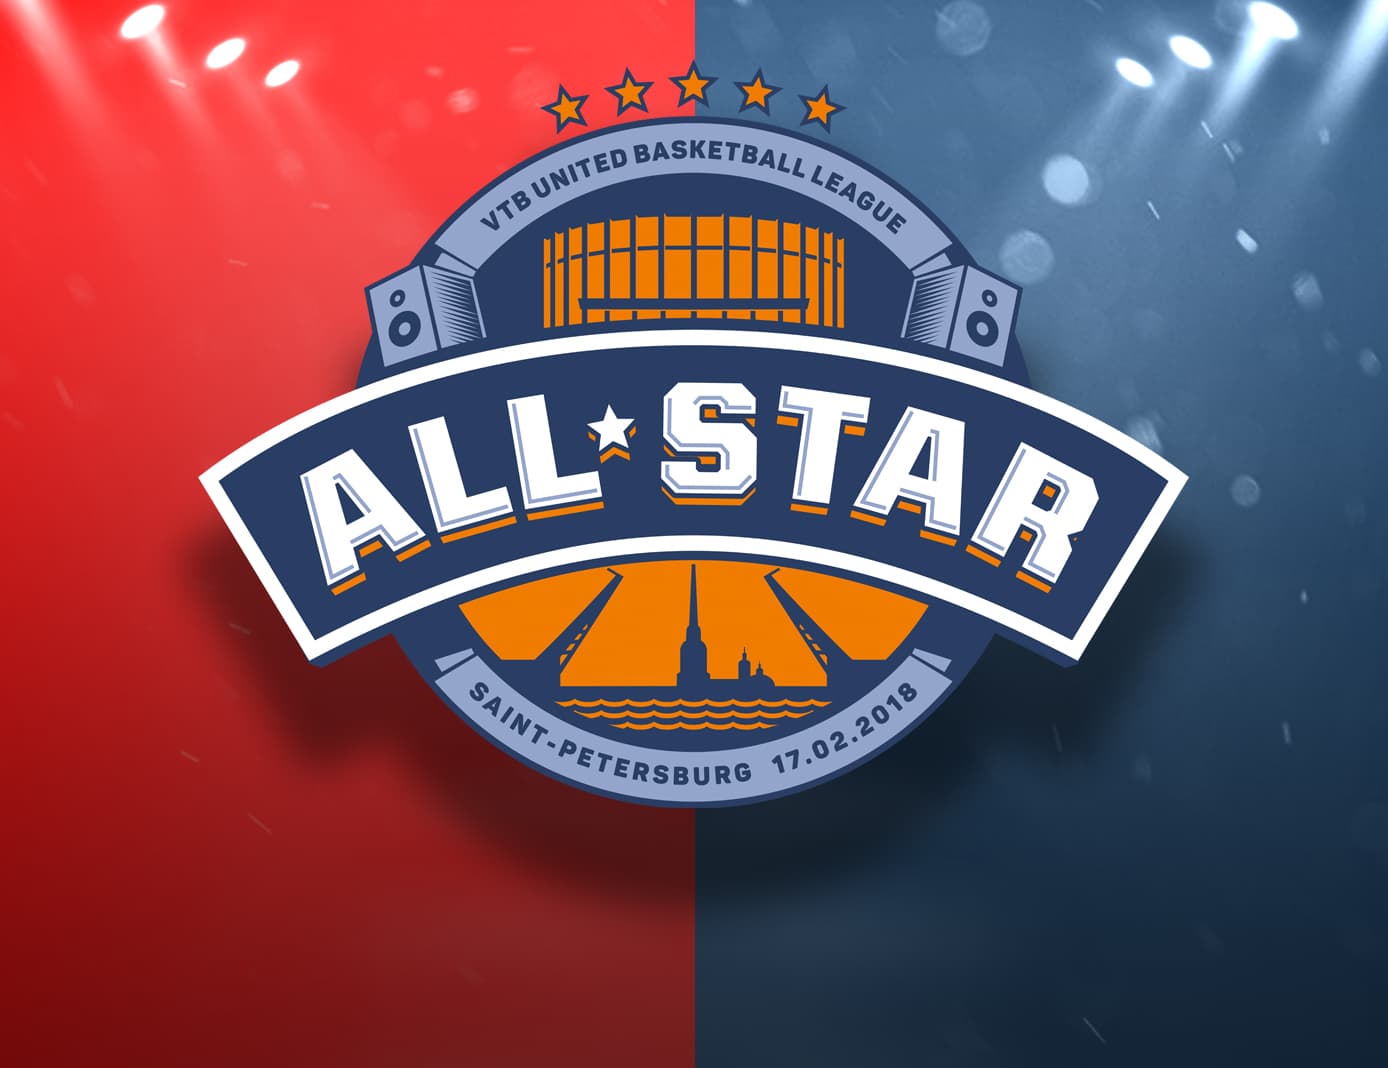 Media Selects 10-Man All-Star Game Rosters